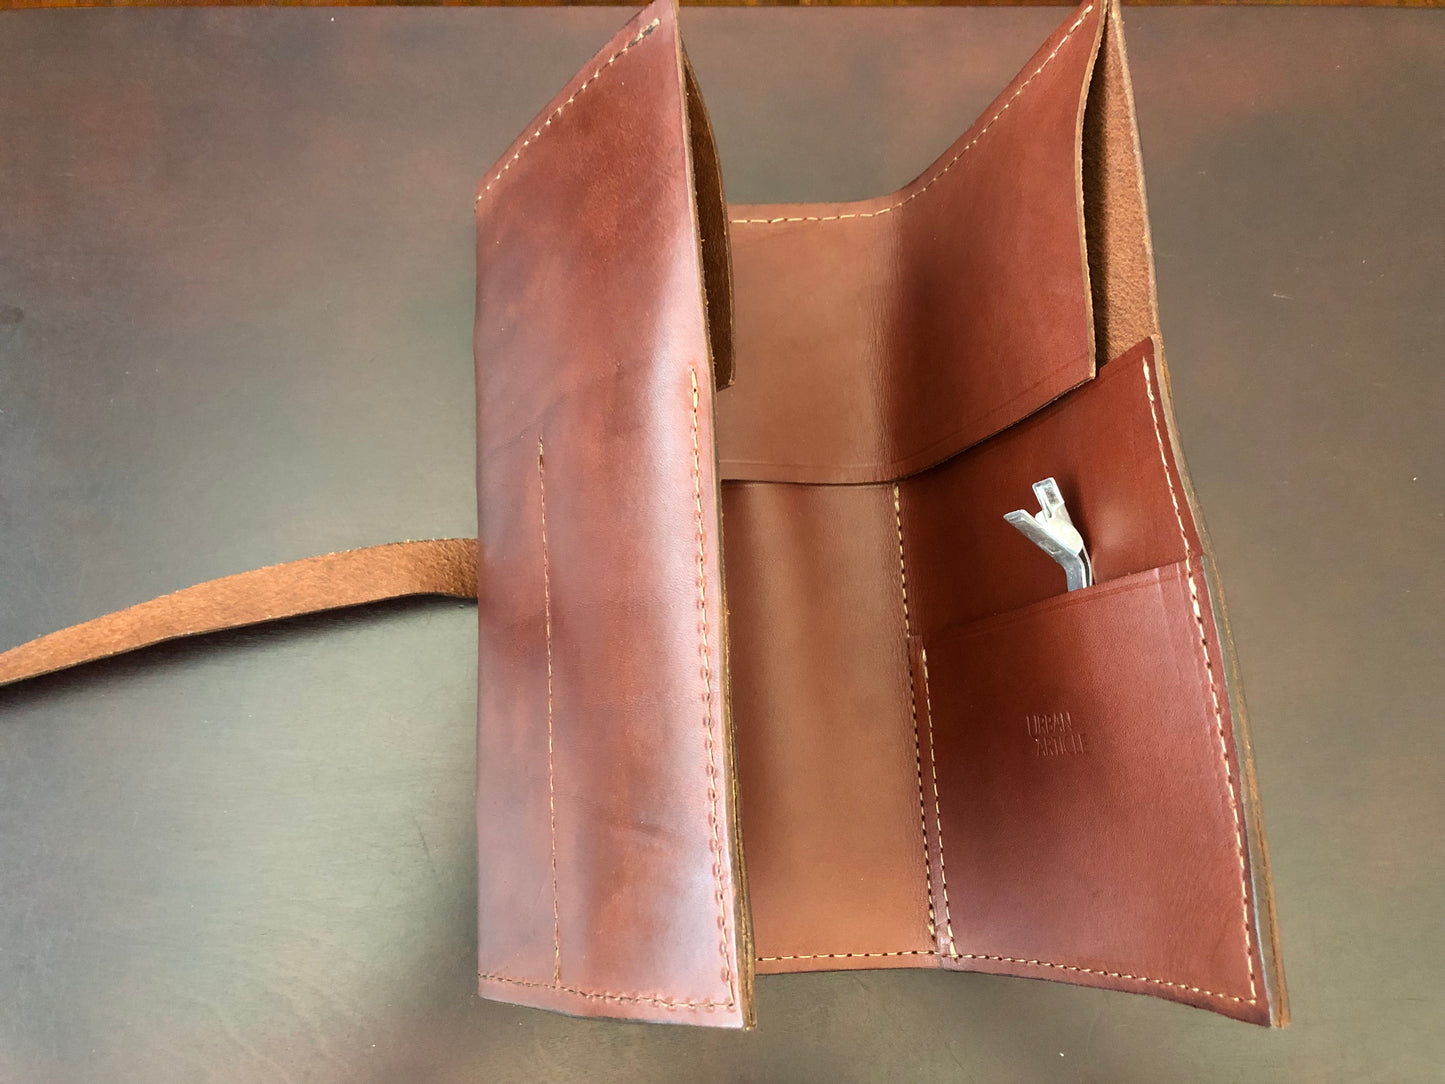 Leather tool roll shown open with tools.